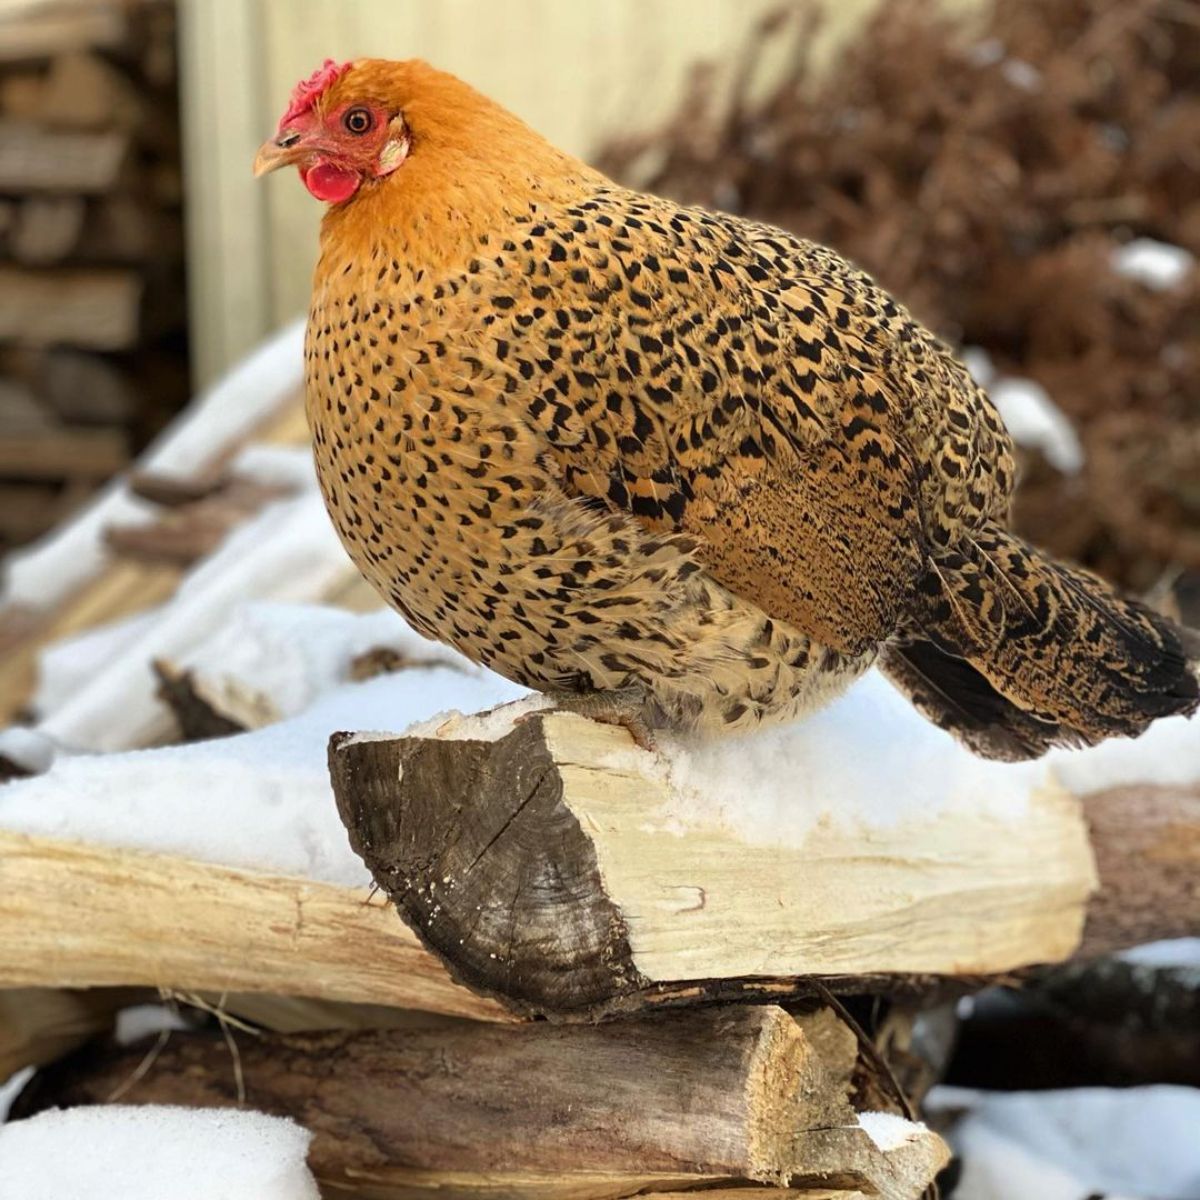 A puffed Sicilian Buttercup Chicken perched on firewood.